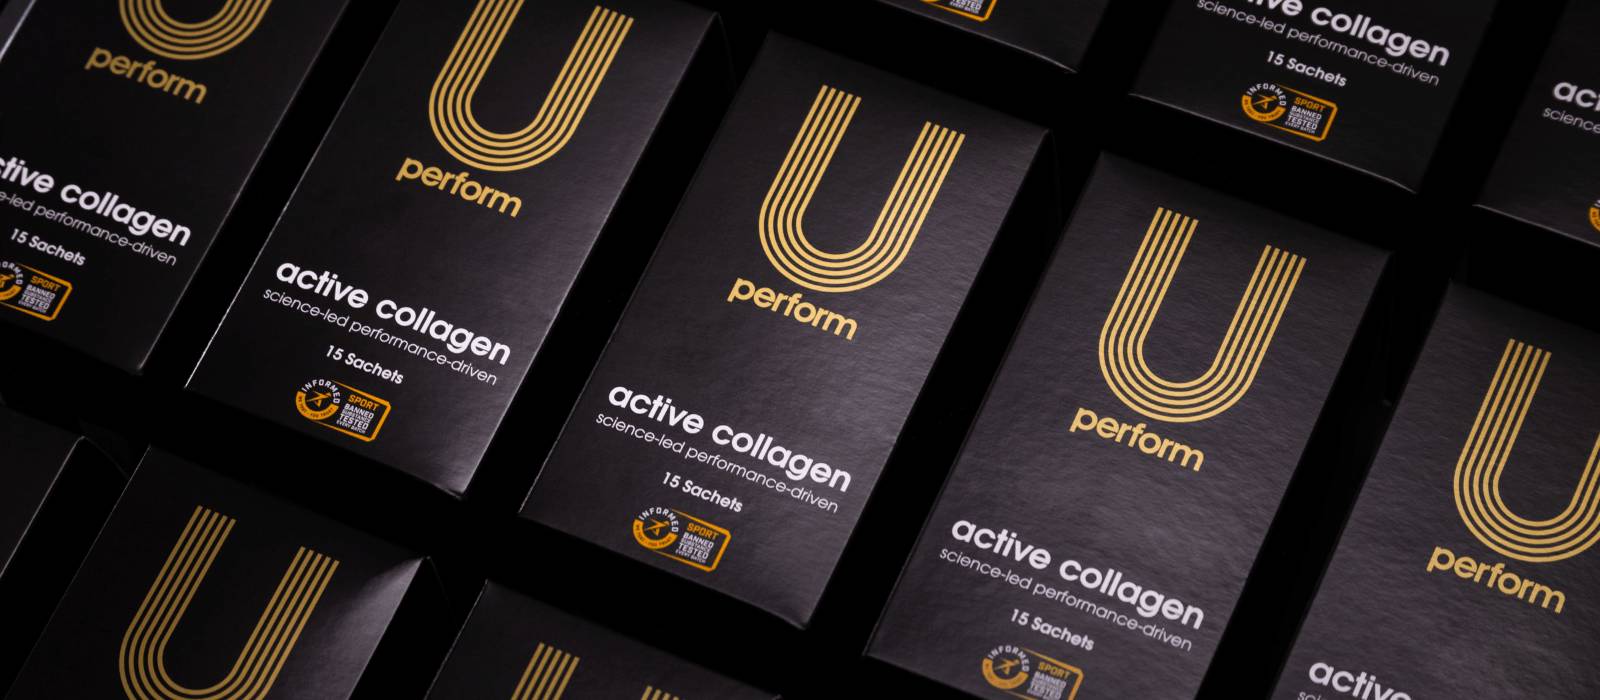 U Perform Active Collagen boxes lined up on a black background